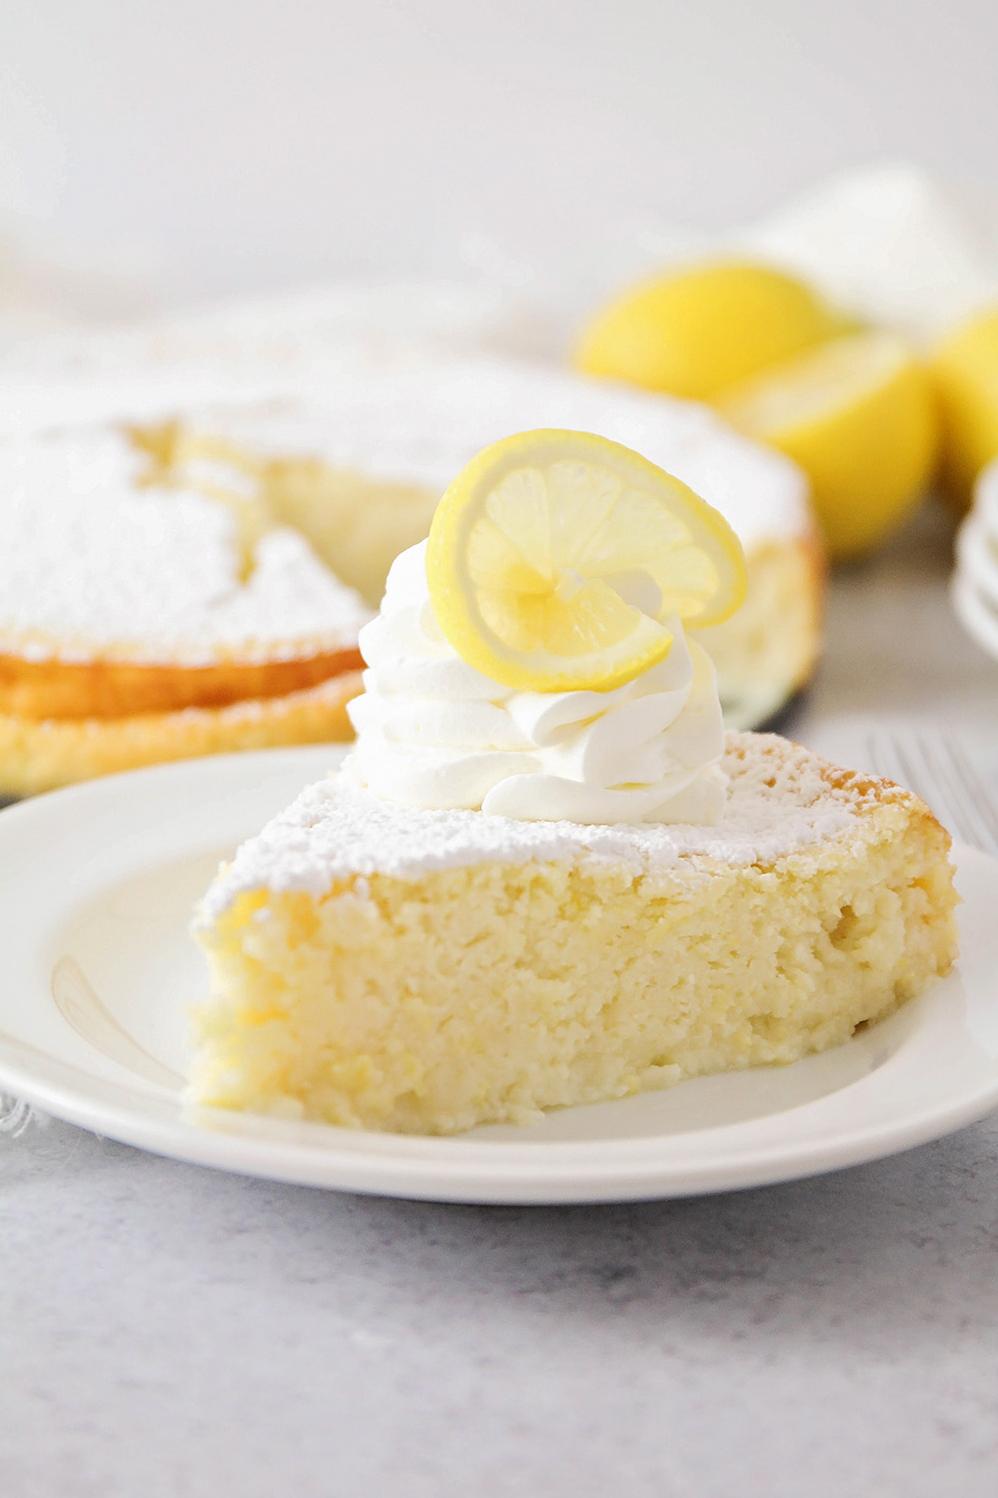  A lemon-infused creamy delight